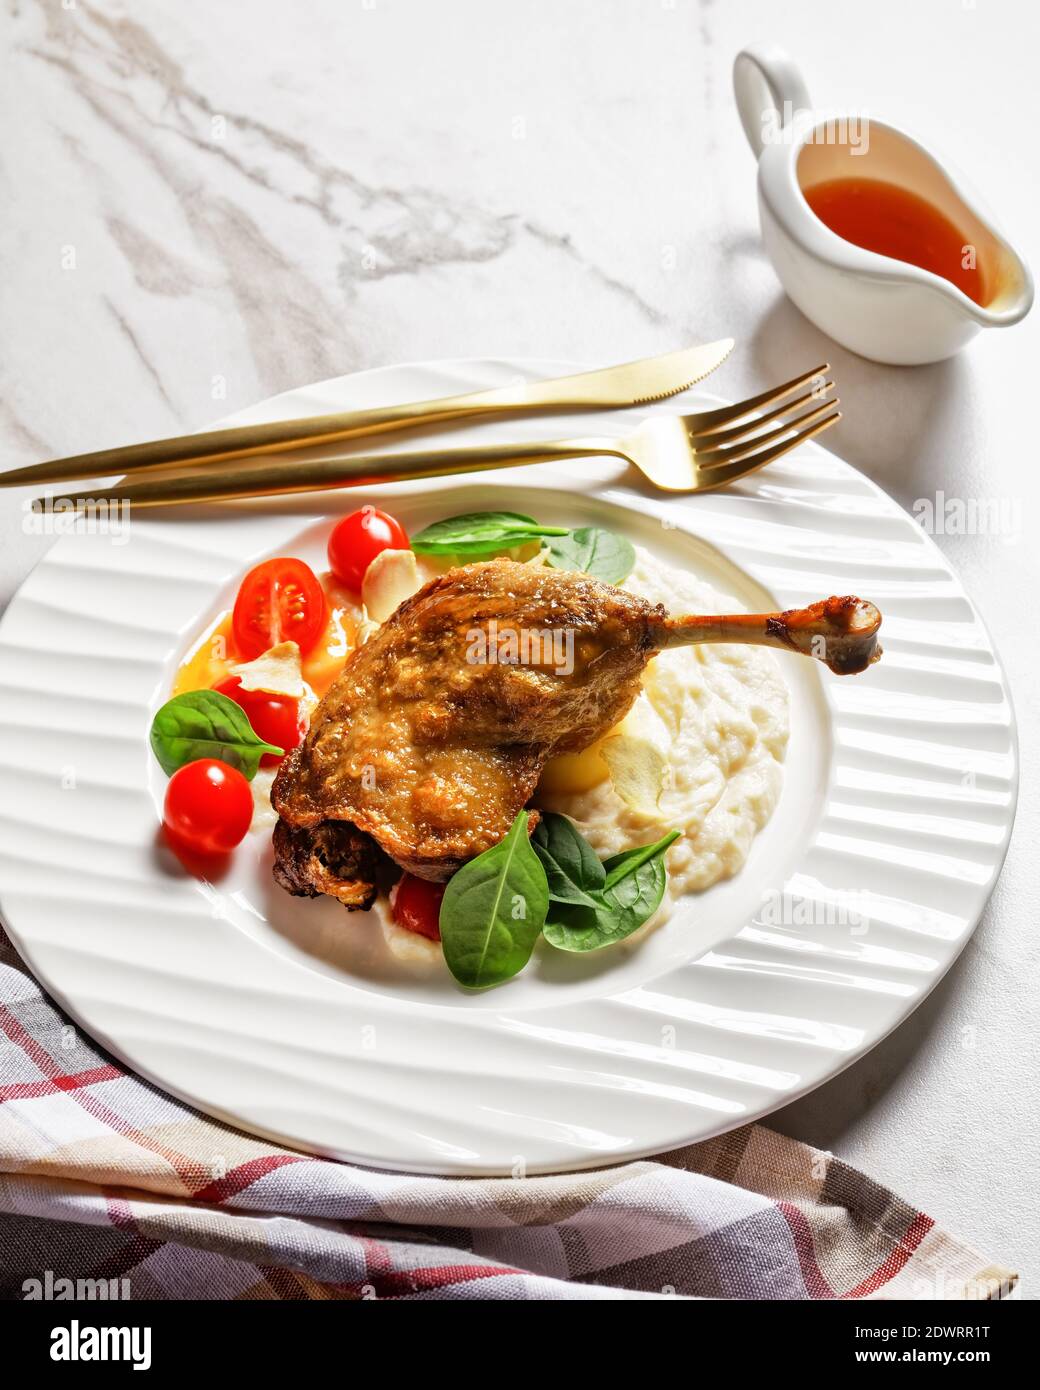 Roasted duck leg - duck confit with parsnip puree and orange sauce cherry tomatoes, fresh spinach leaves served on a white plate with golden cutlery o Stock Photo